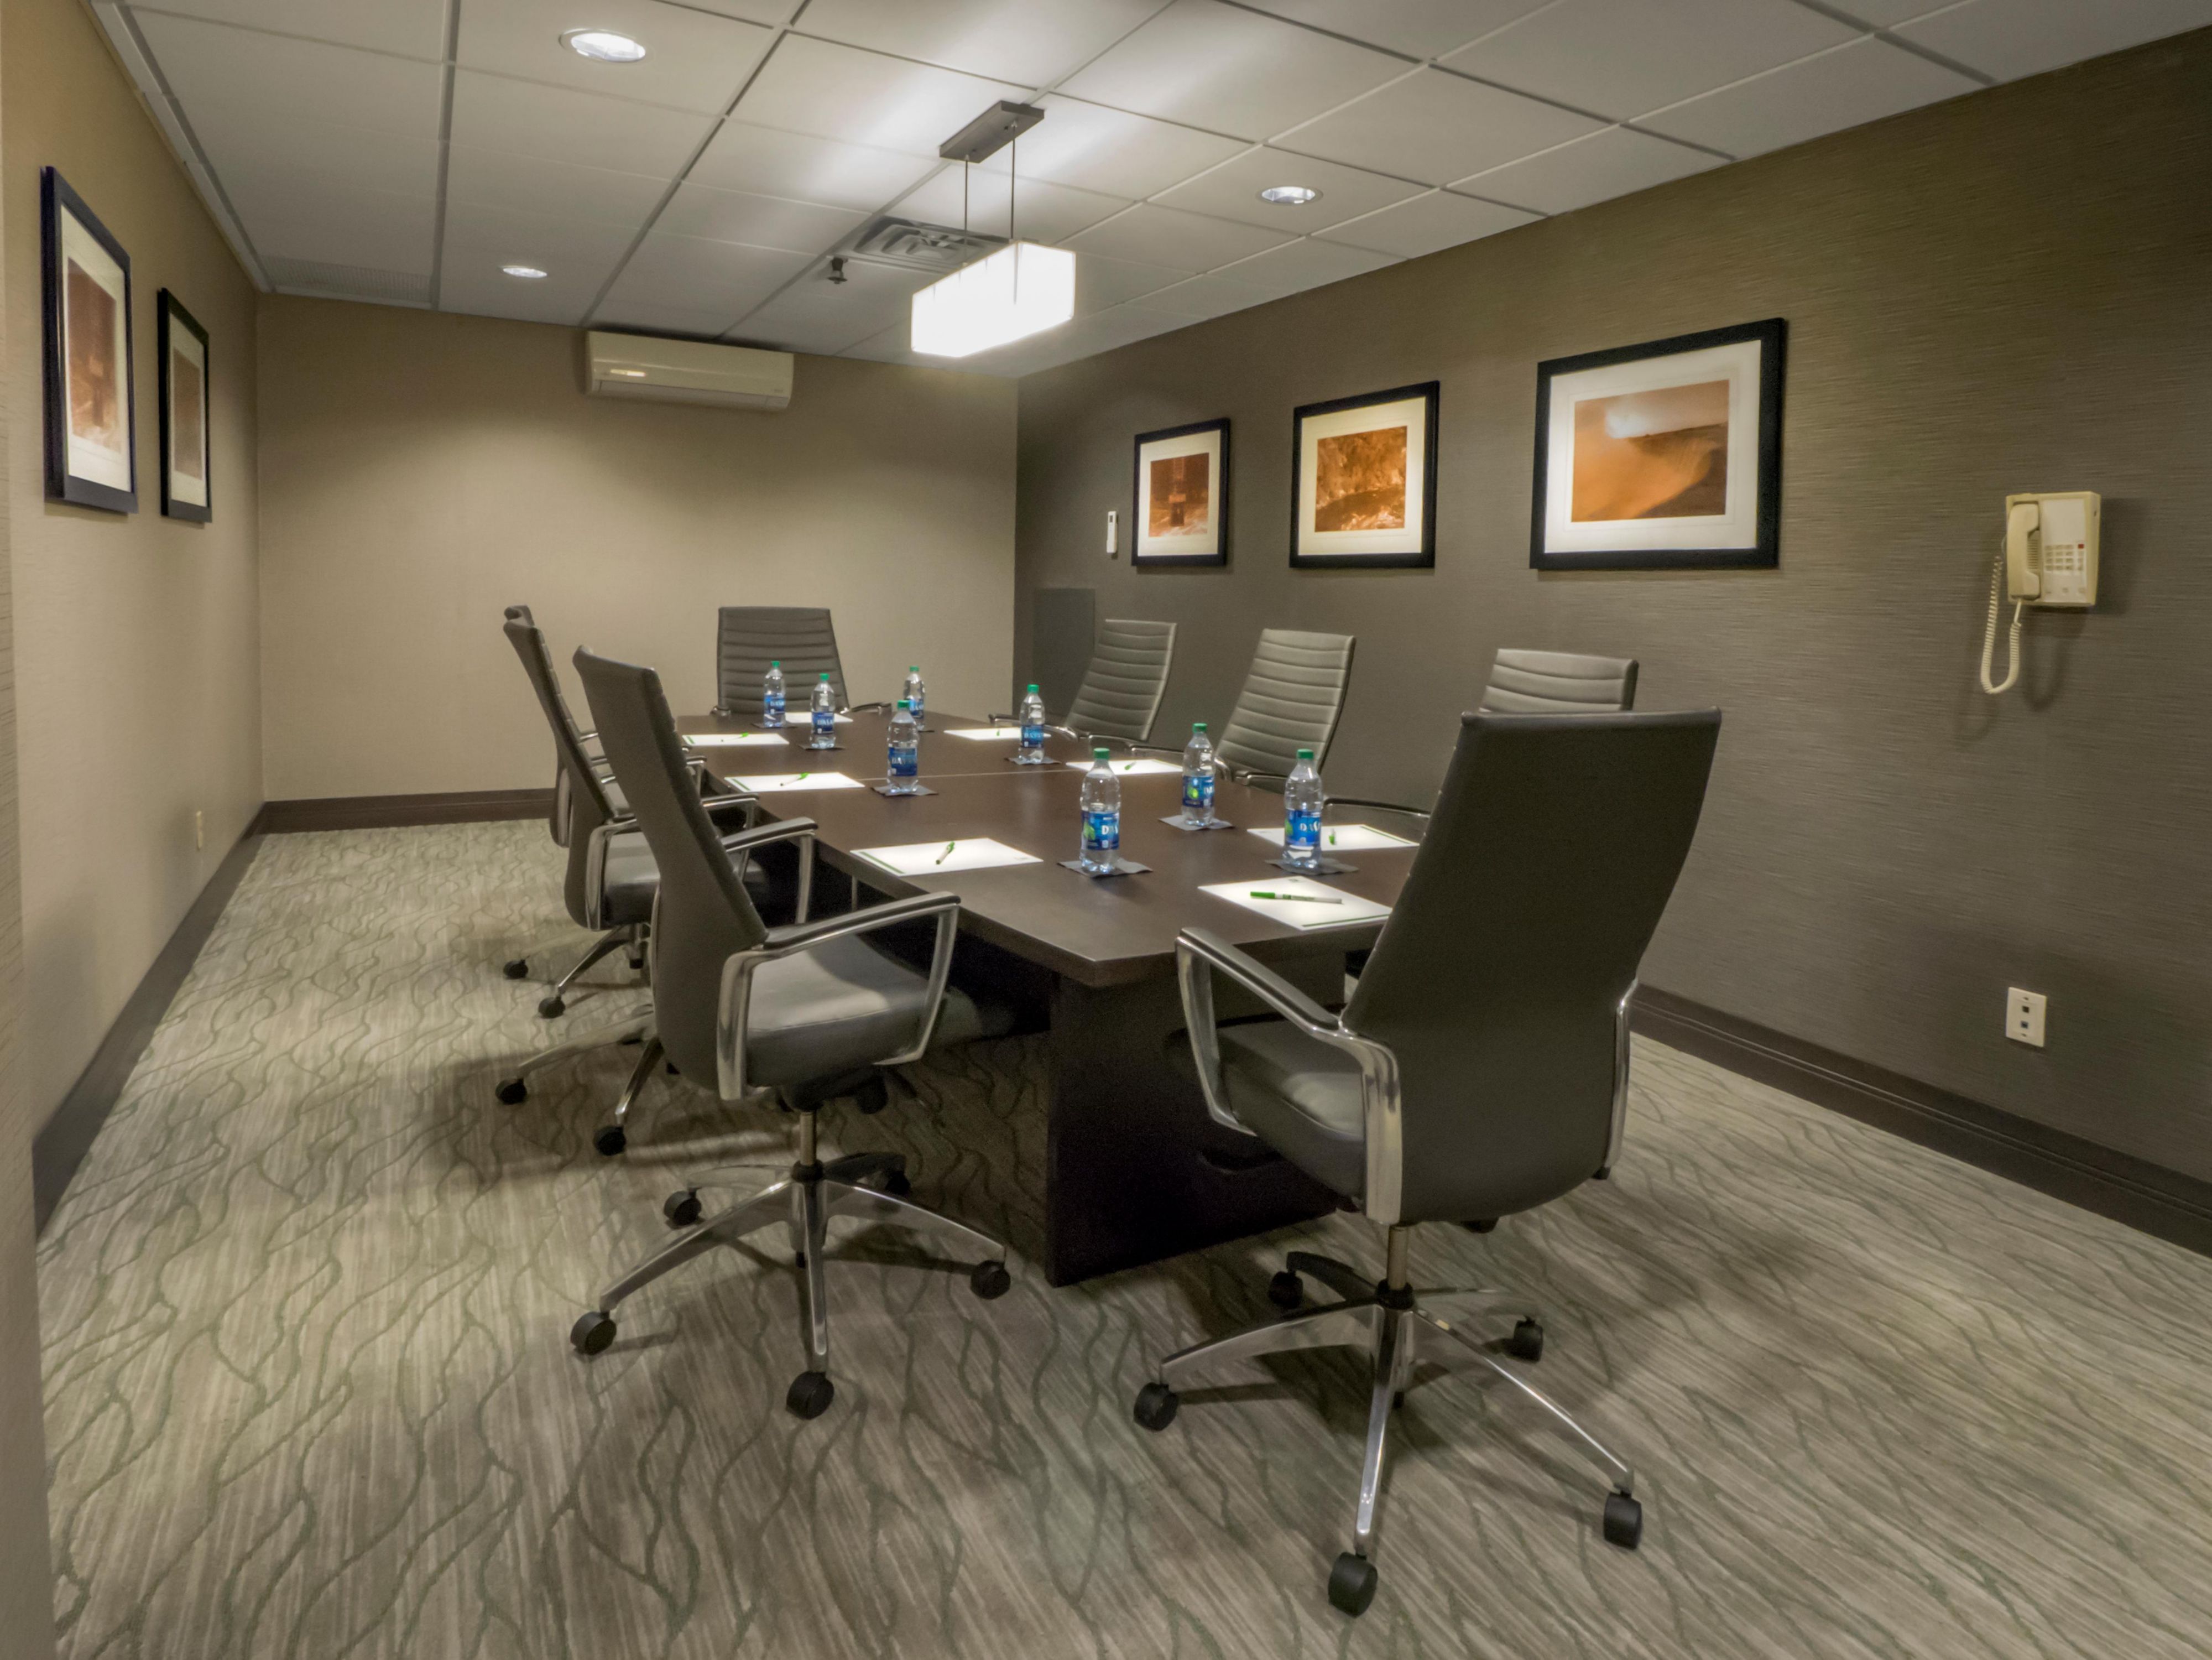 Our helpful staff understands the importance of connecting at your next meeting. So, whether you're a first-timer or an experienced organizer, we make it easy to plan and book your meeting space so you can focus on creating moments that matter.